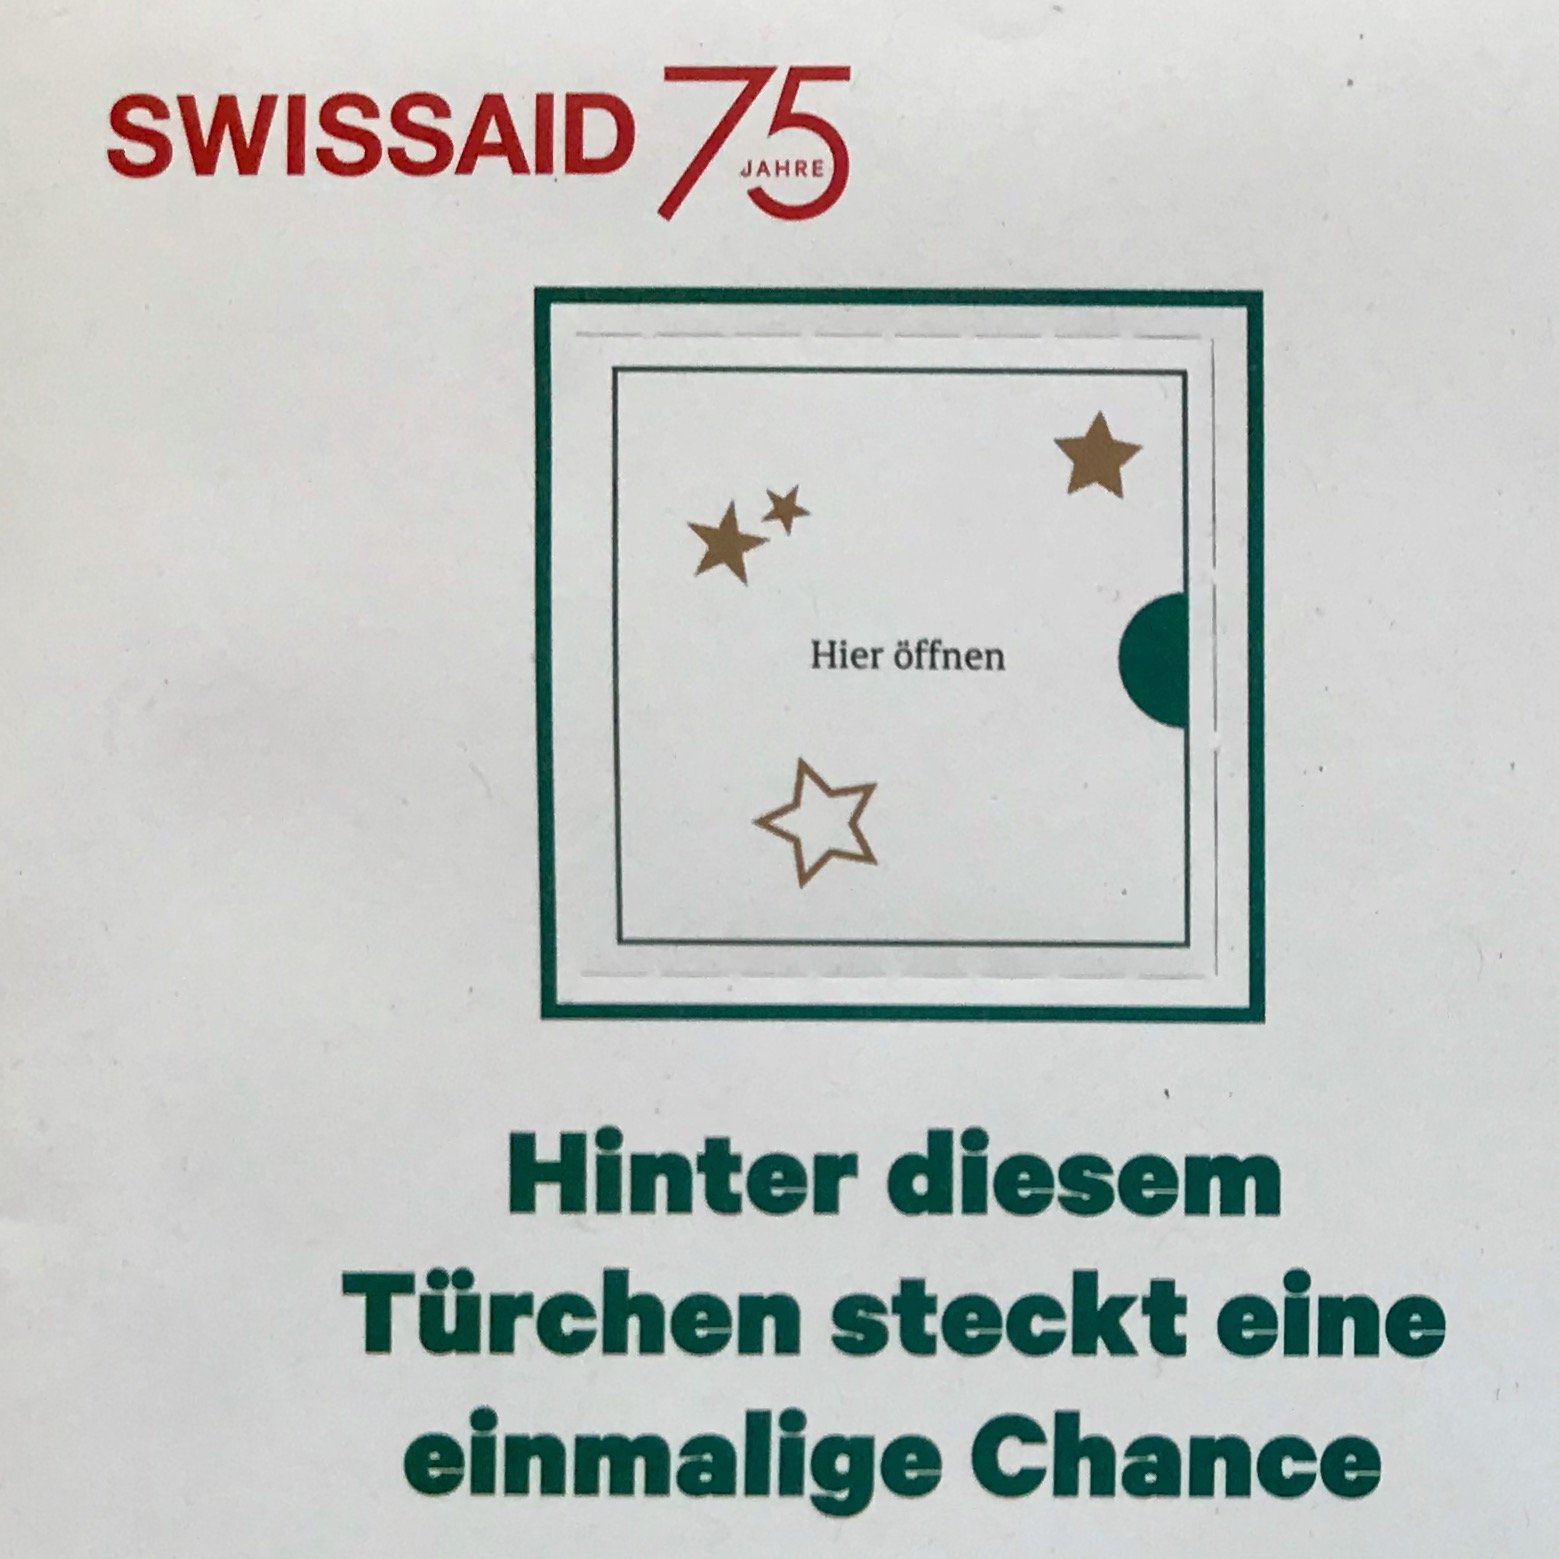 SWISSAID Spendenmailings